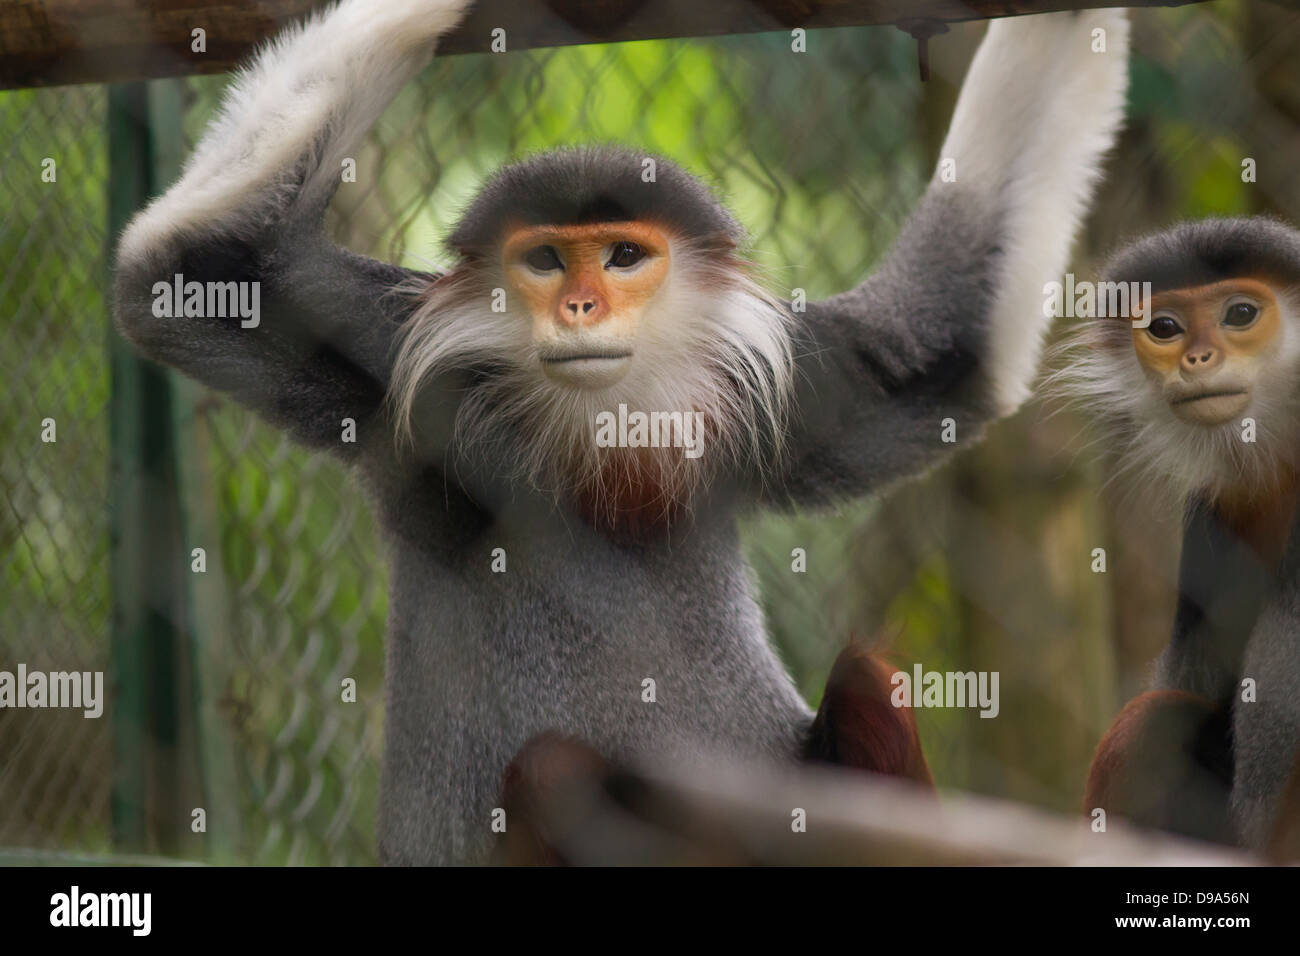 Red-shanked douc langur at Endangered Primate Rescue Center, Cuc Phuong National Park, Vietnam. Stock Photo